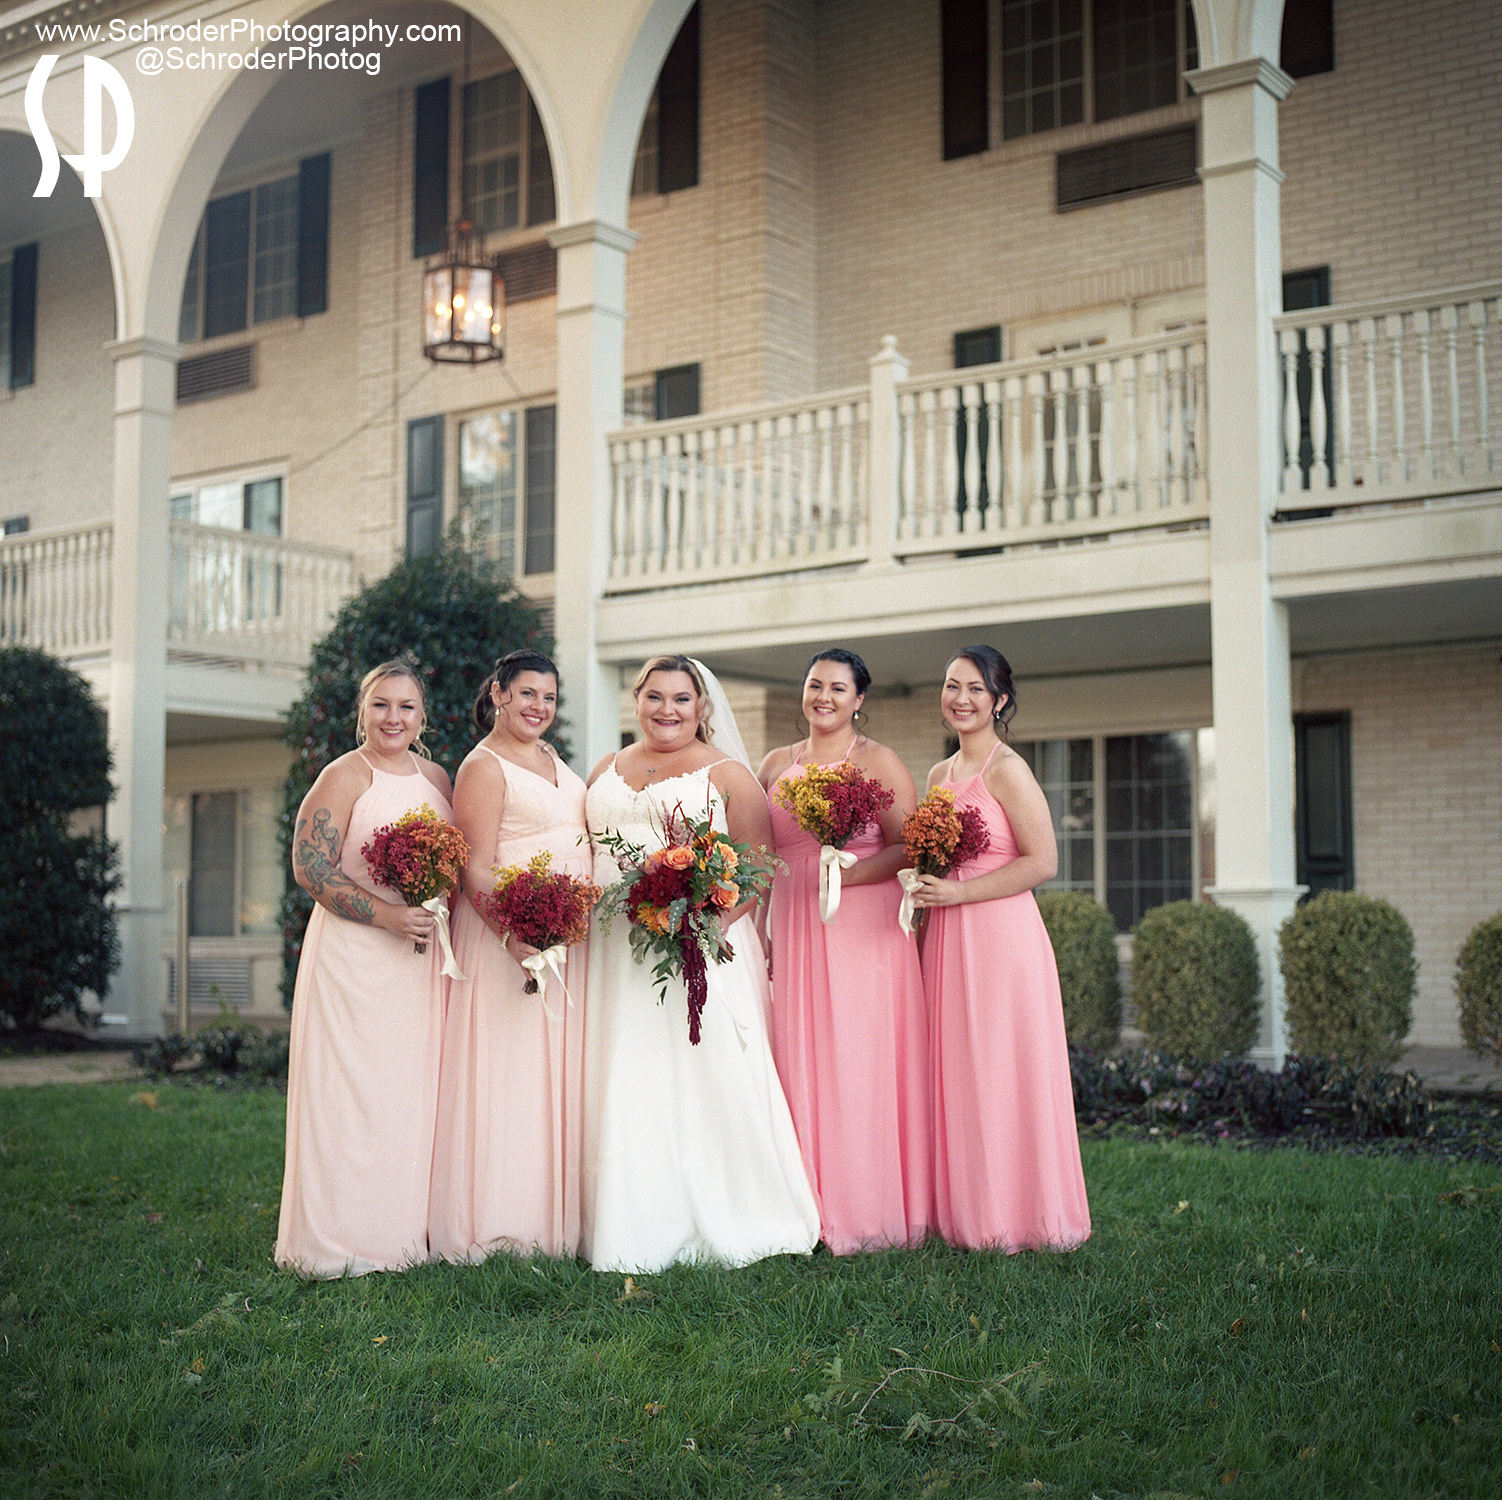 Bridal Party at the Madison Hotel in Morristown